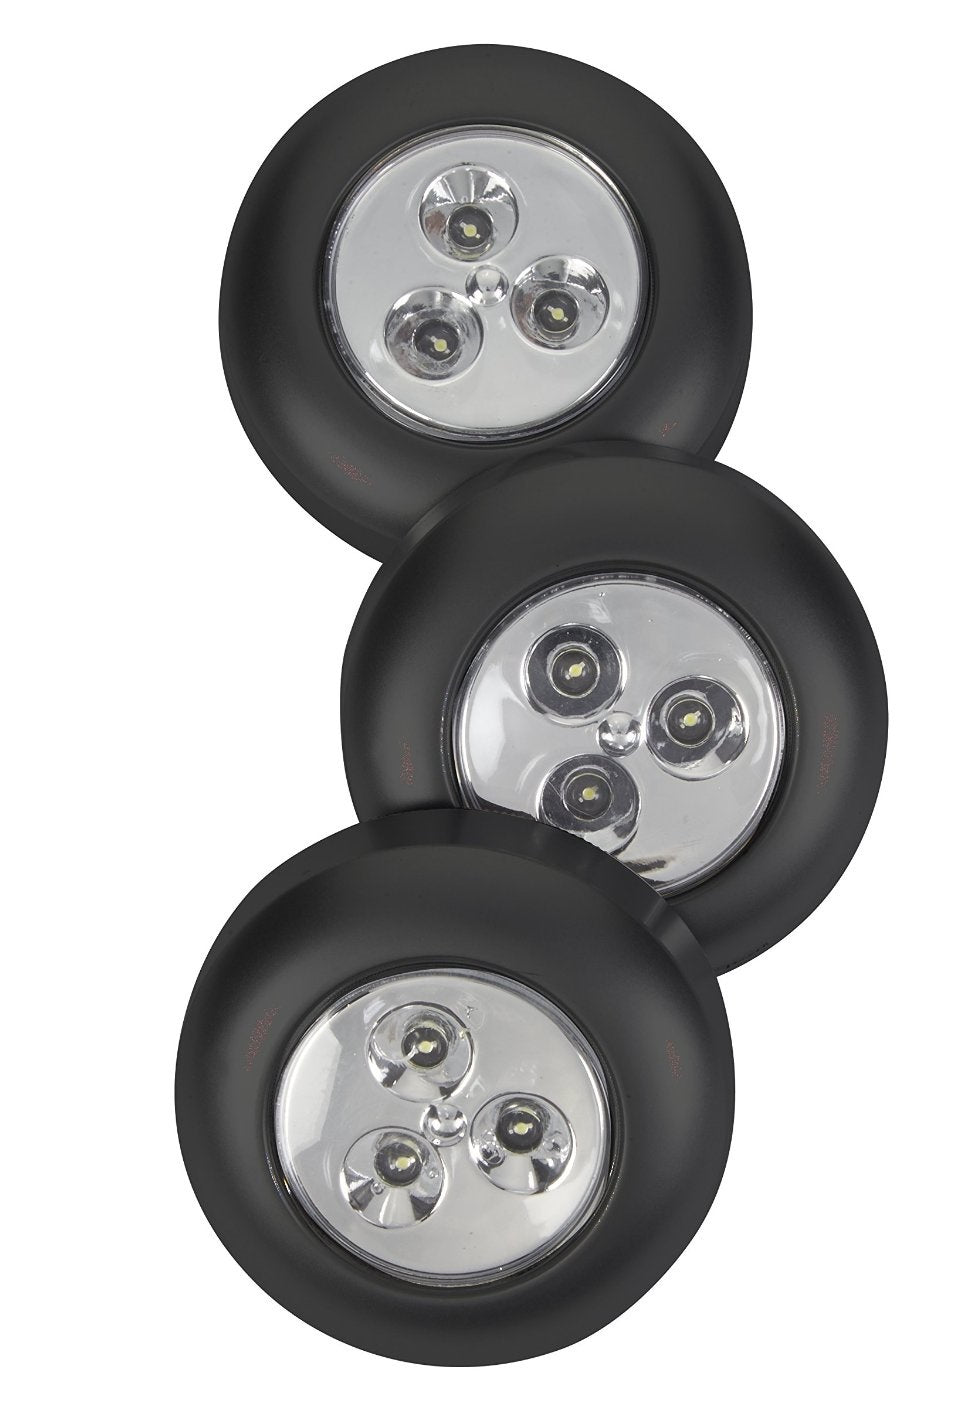 Fulcrum 30010-303 Battery-Operated Stick-On Tap Light, Black, 3 Piece